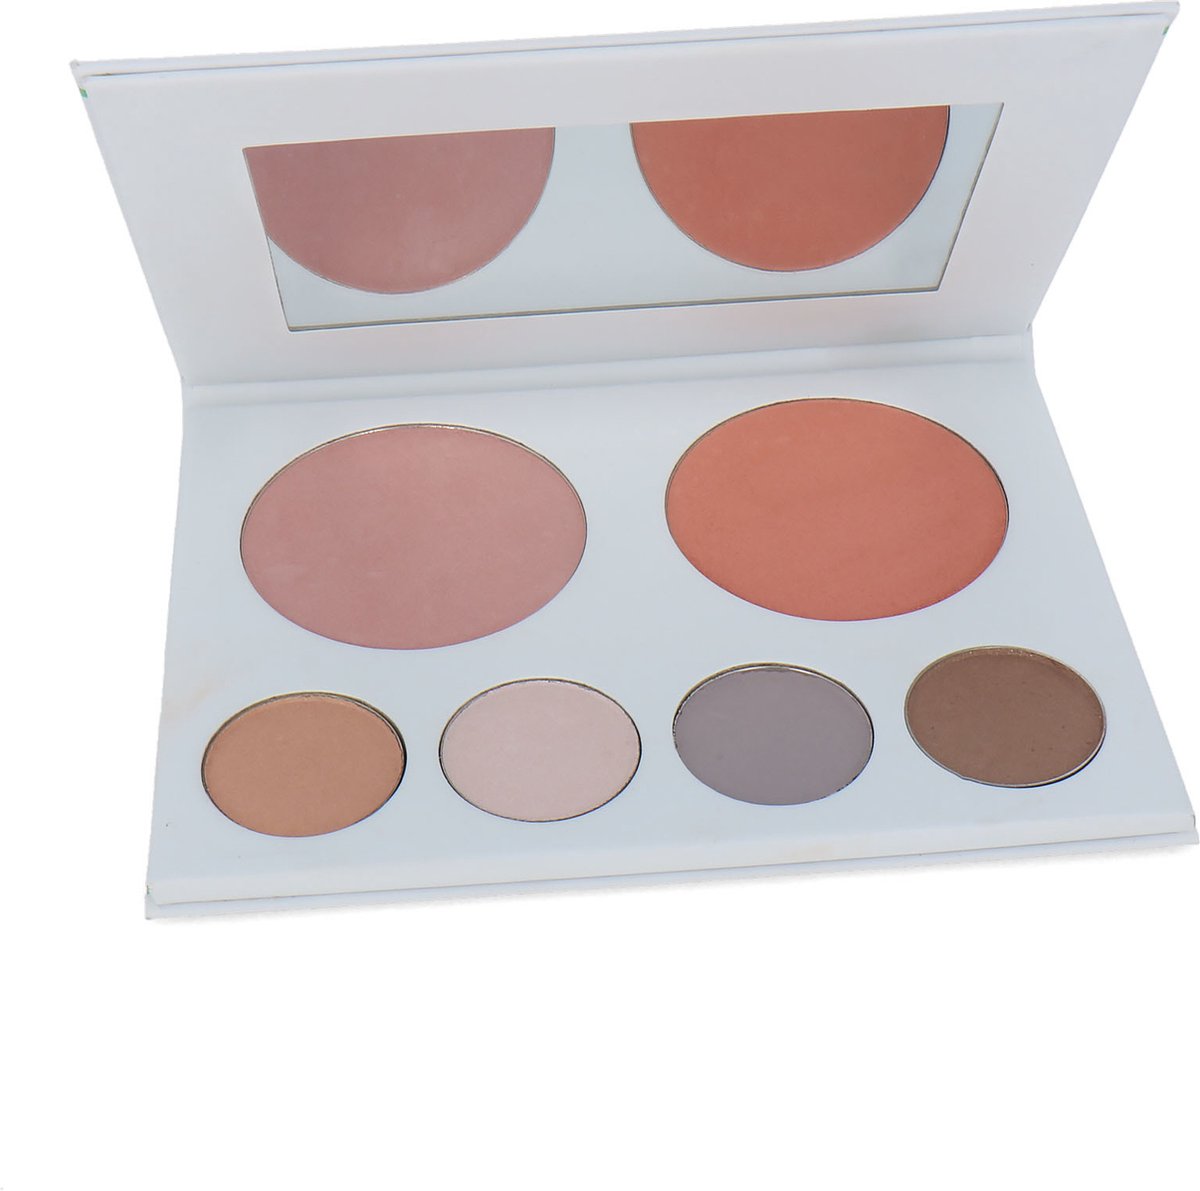 PHB Ethical Beauty Pressed Minerals 6 Piece Pallet - For Day